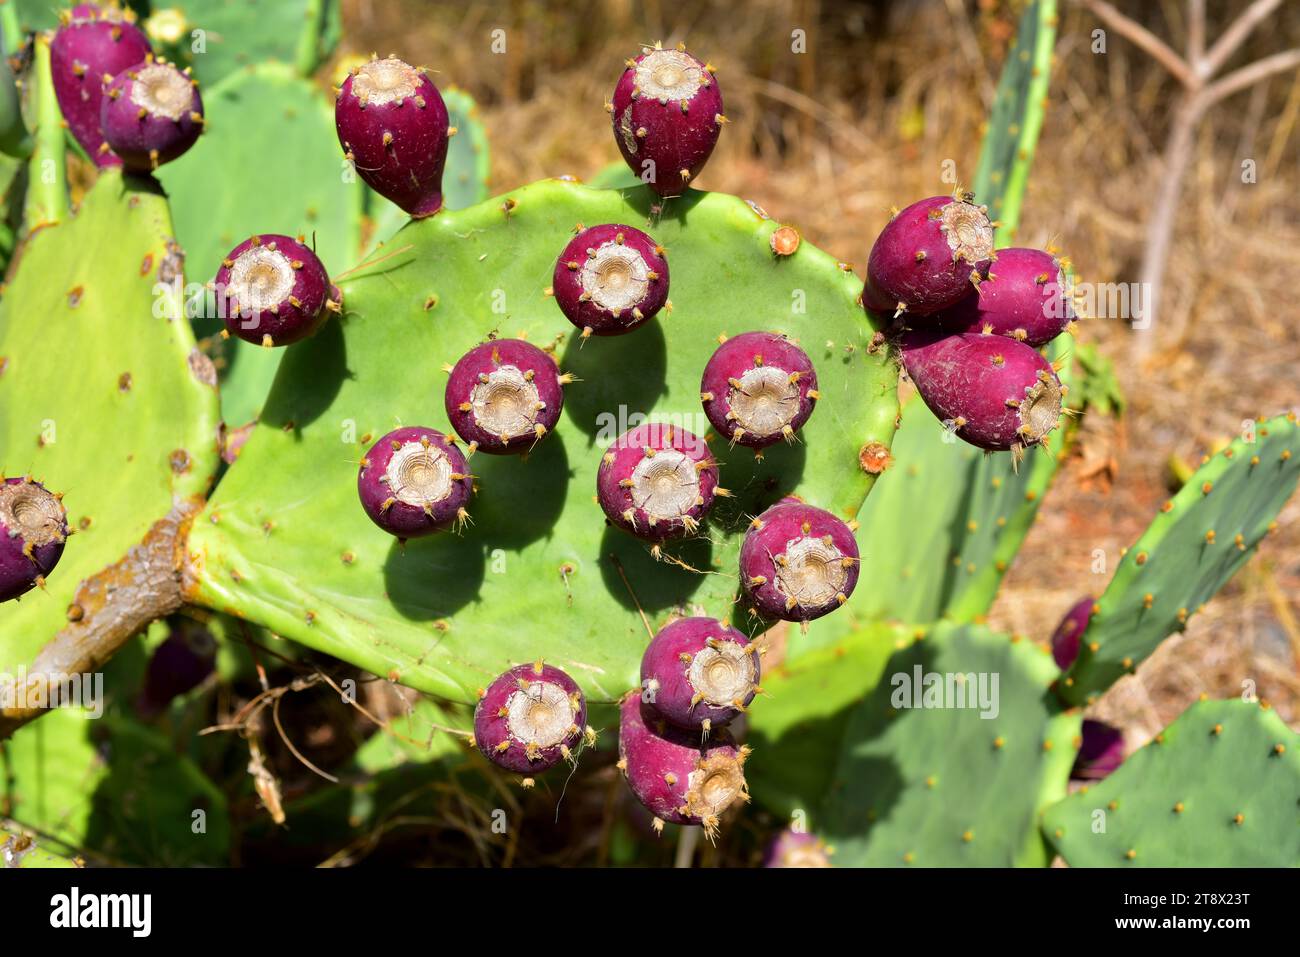 Opuntia dillenii is a cactus native to Mexico, USA and Caribbean Islands but naturalized in many arid or semiarid region of the World. This photo was Stock Photo